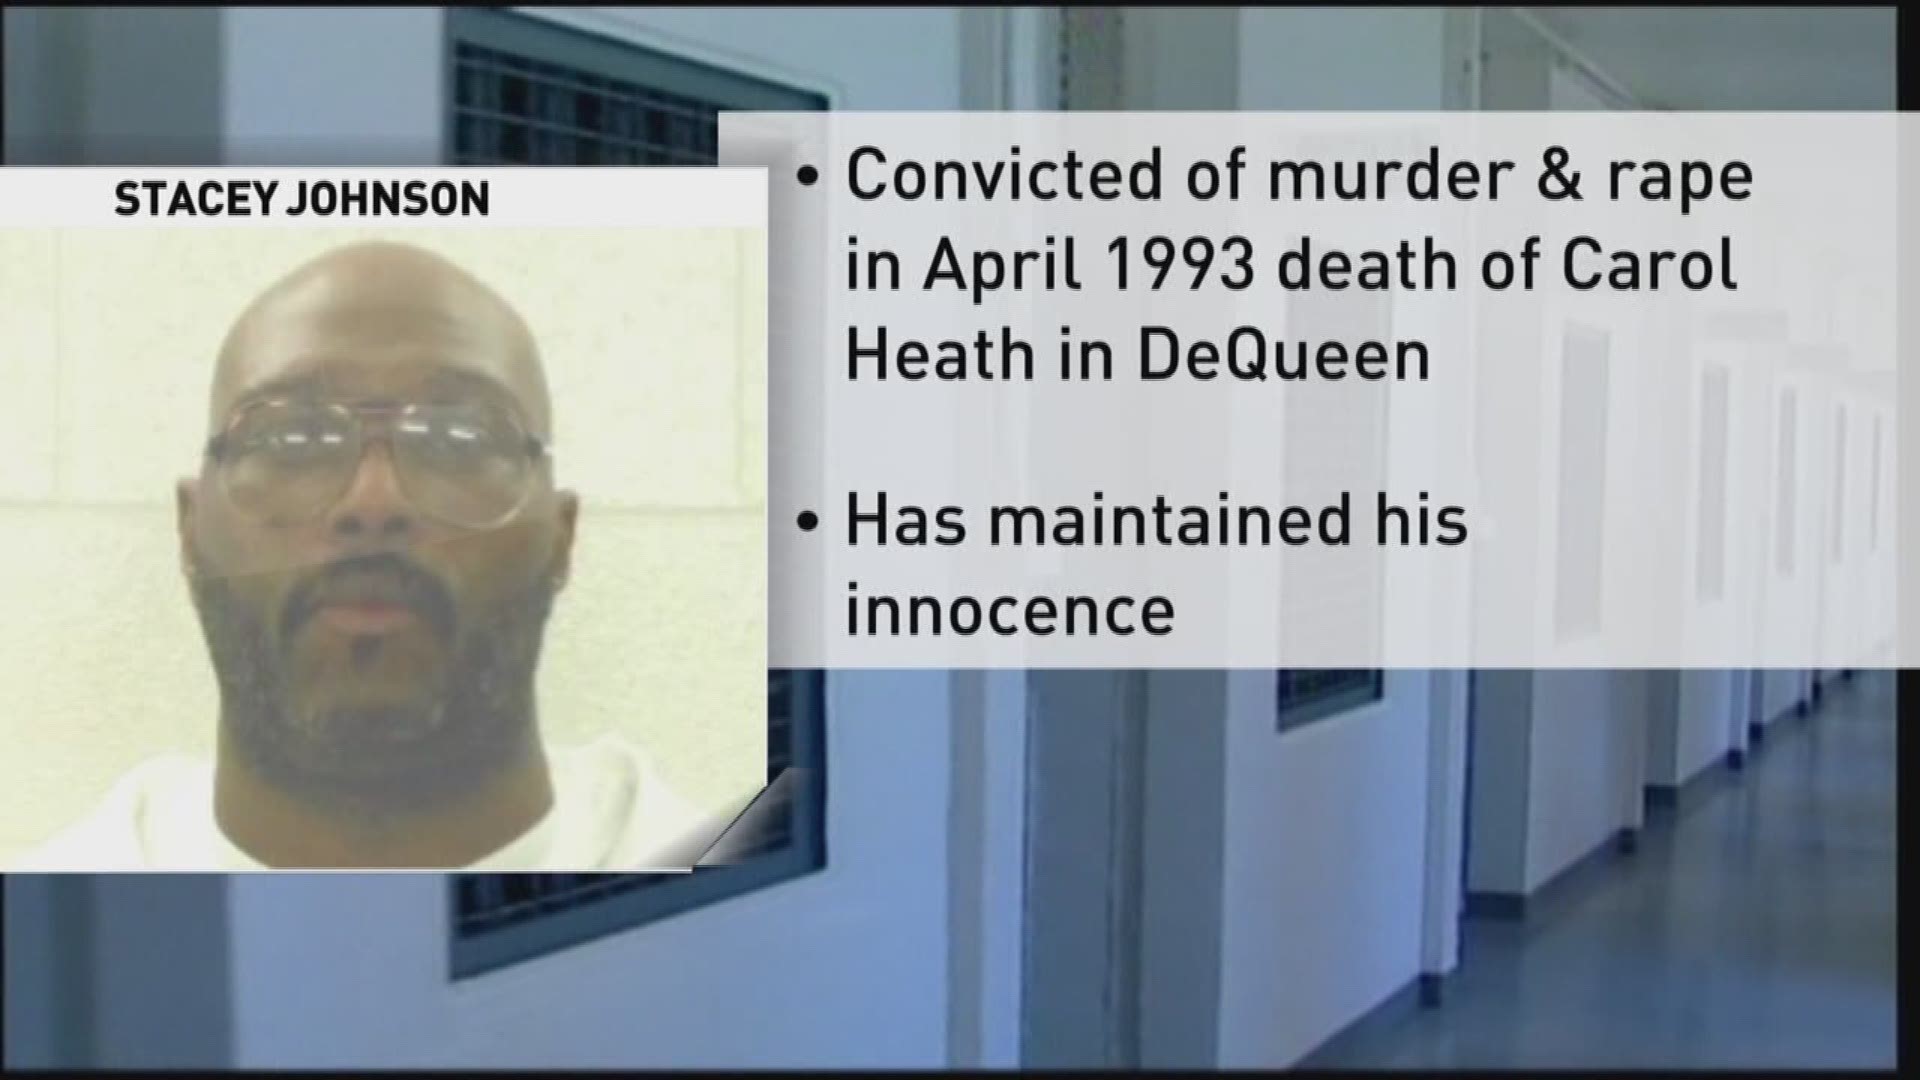 Stacey Johnson was granted a stay of his scheduled execution